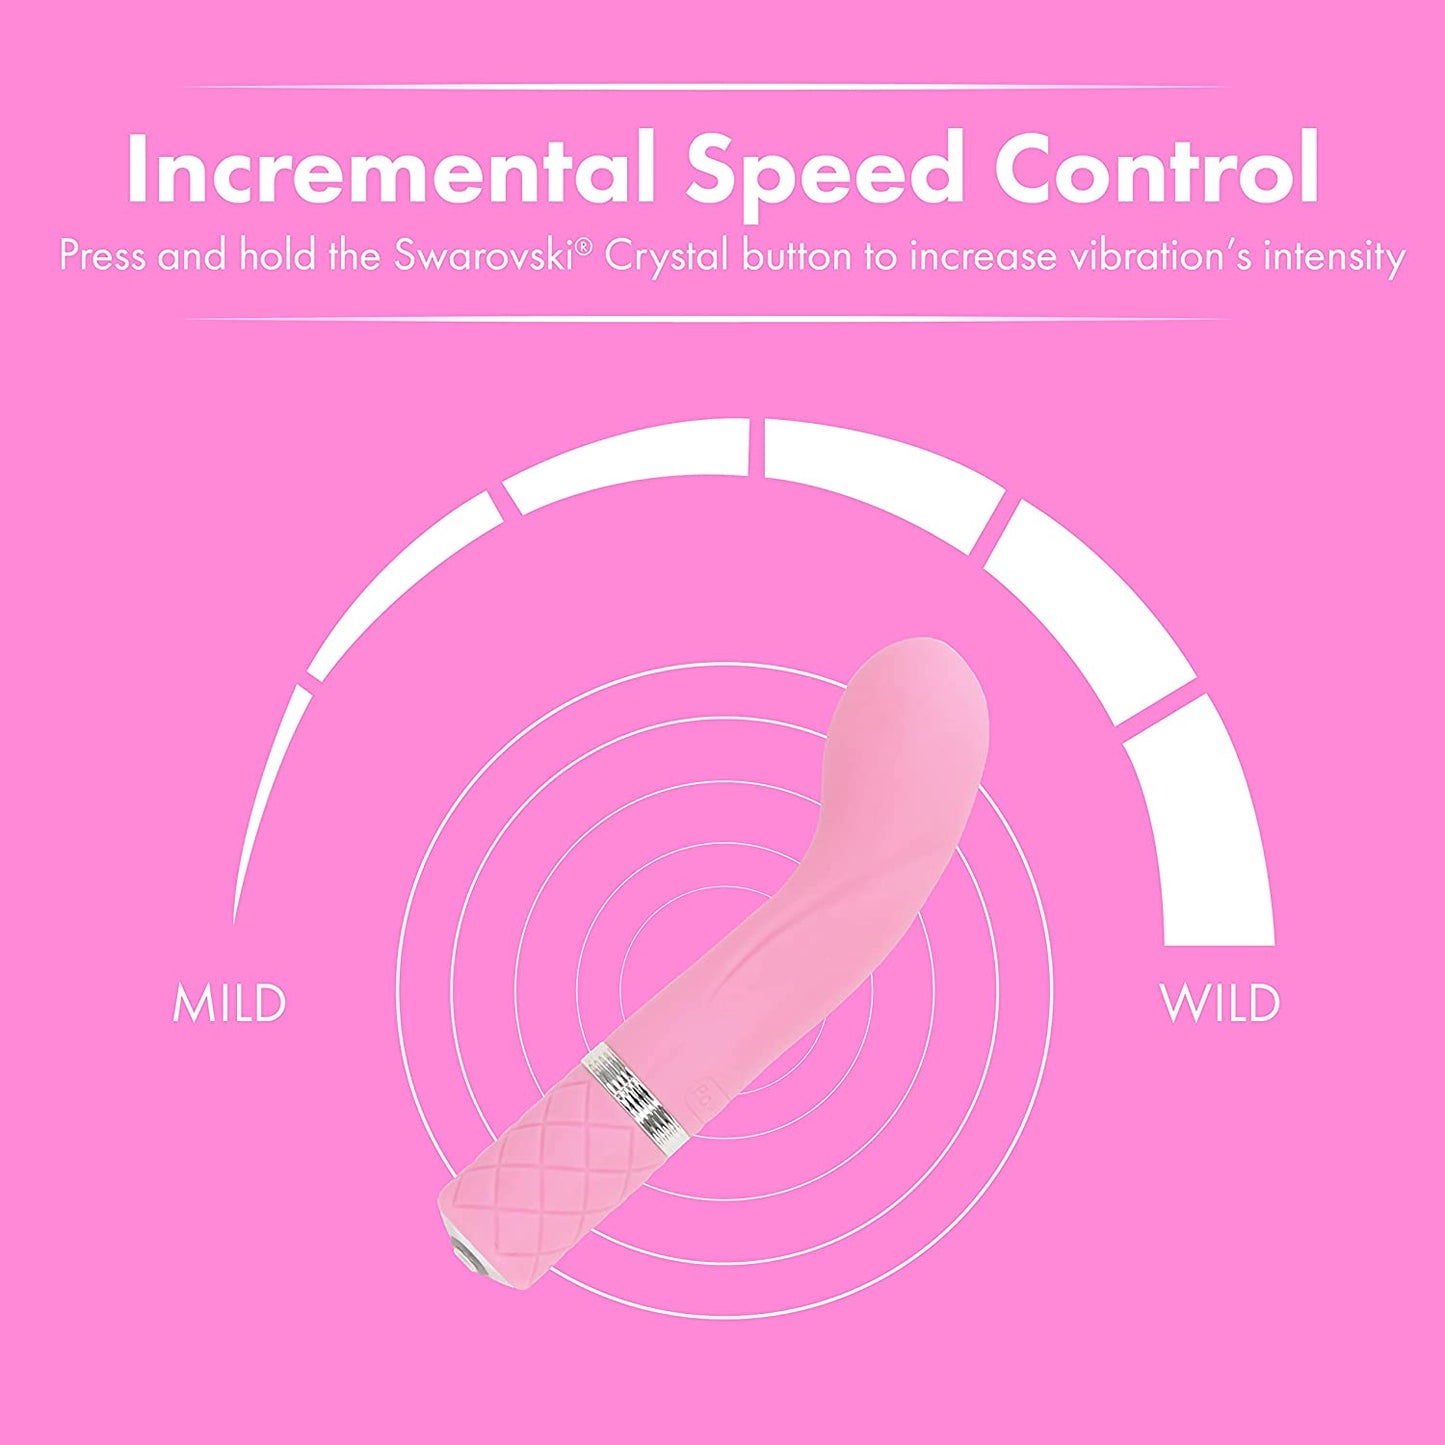 Racy by Pillow Talk offers unbelievable vibrations for external pleasure or G-spot stimulation. This mini vibrator is rechargeable and is conveniently compact for travel. With a quilted texture handle, silky finish and a dazzling Swarovski® crystal button, this flexible vibrator combines luxury and power in one. 